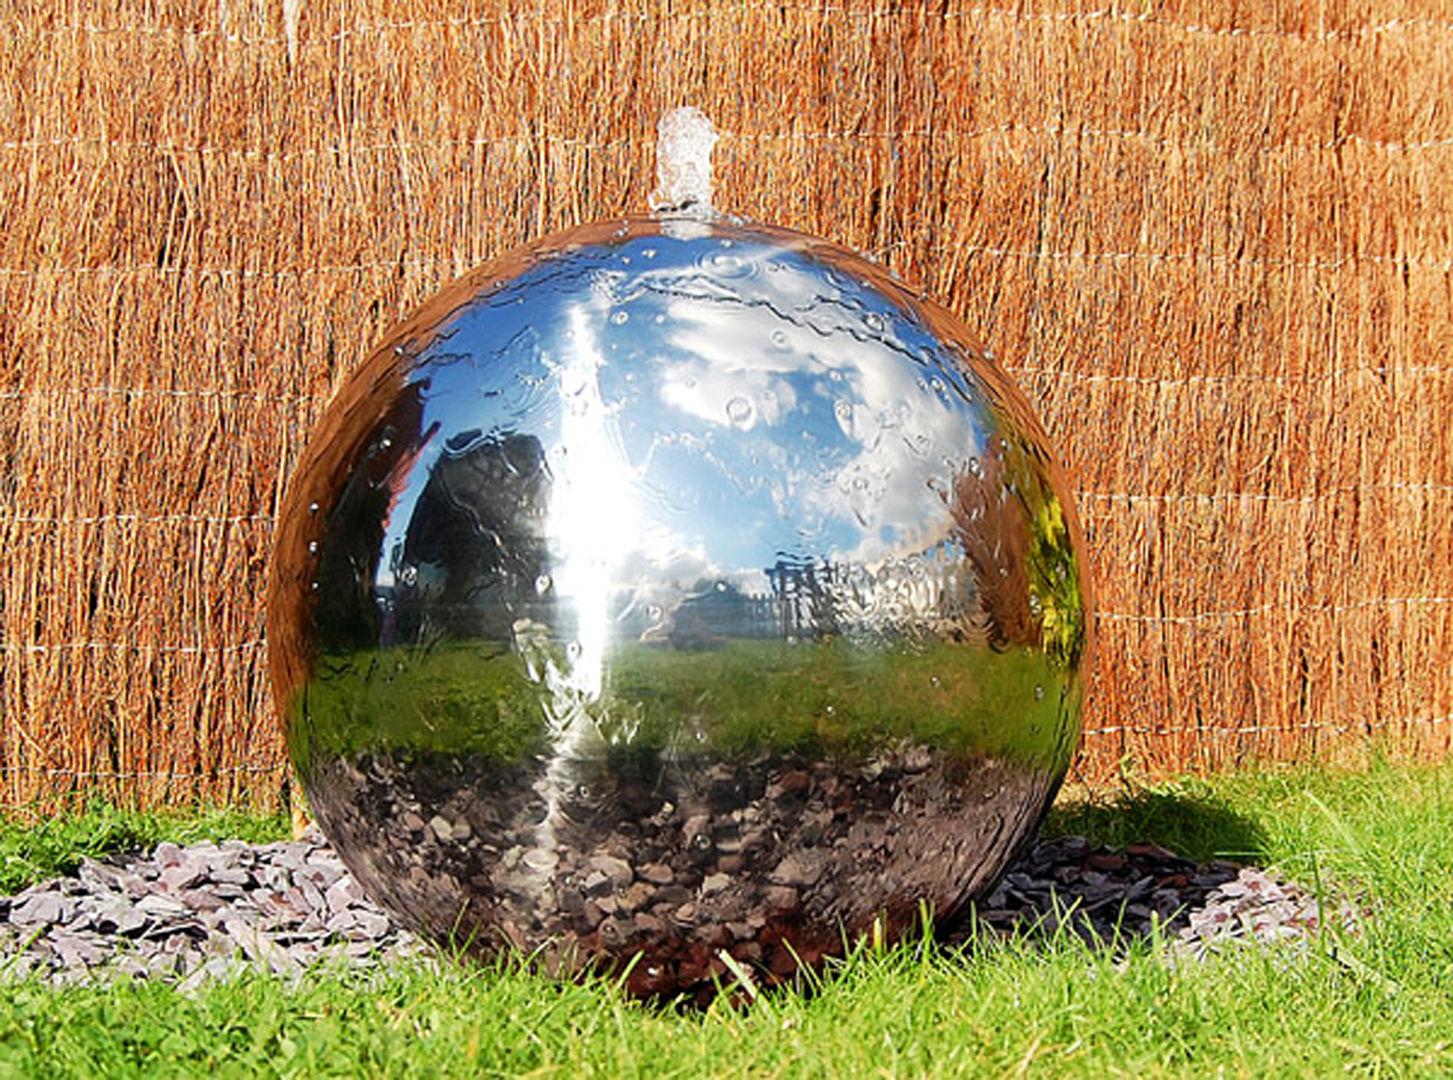 Polished 28cm Stainless Steel Sphere Water Feature Primrose Garden Accessories & decoration